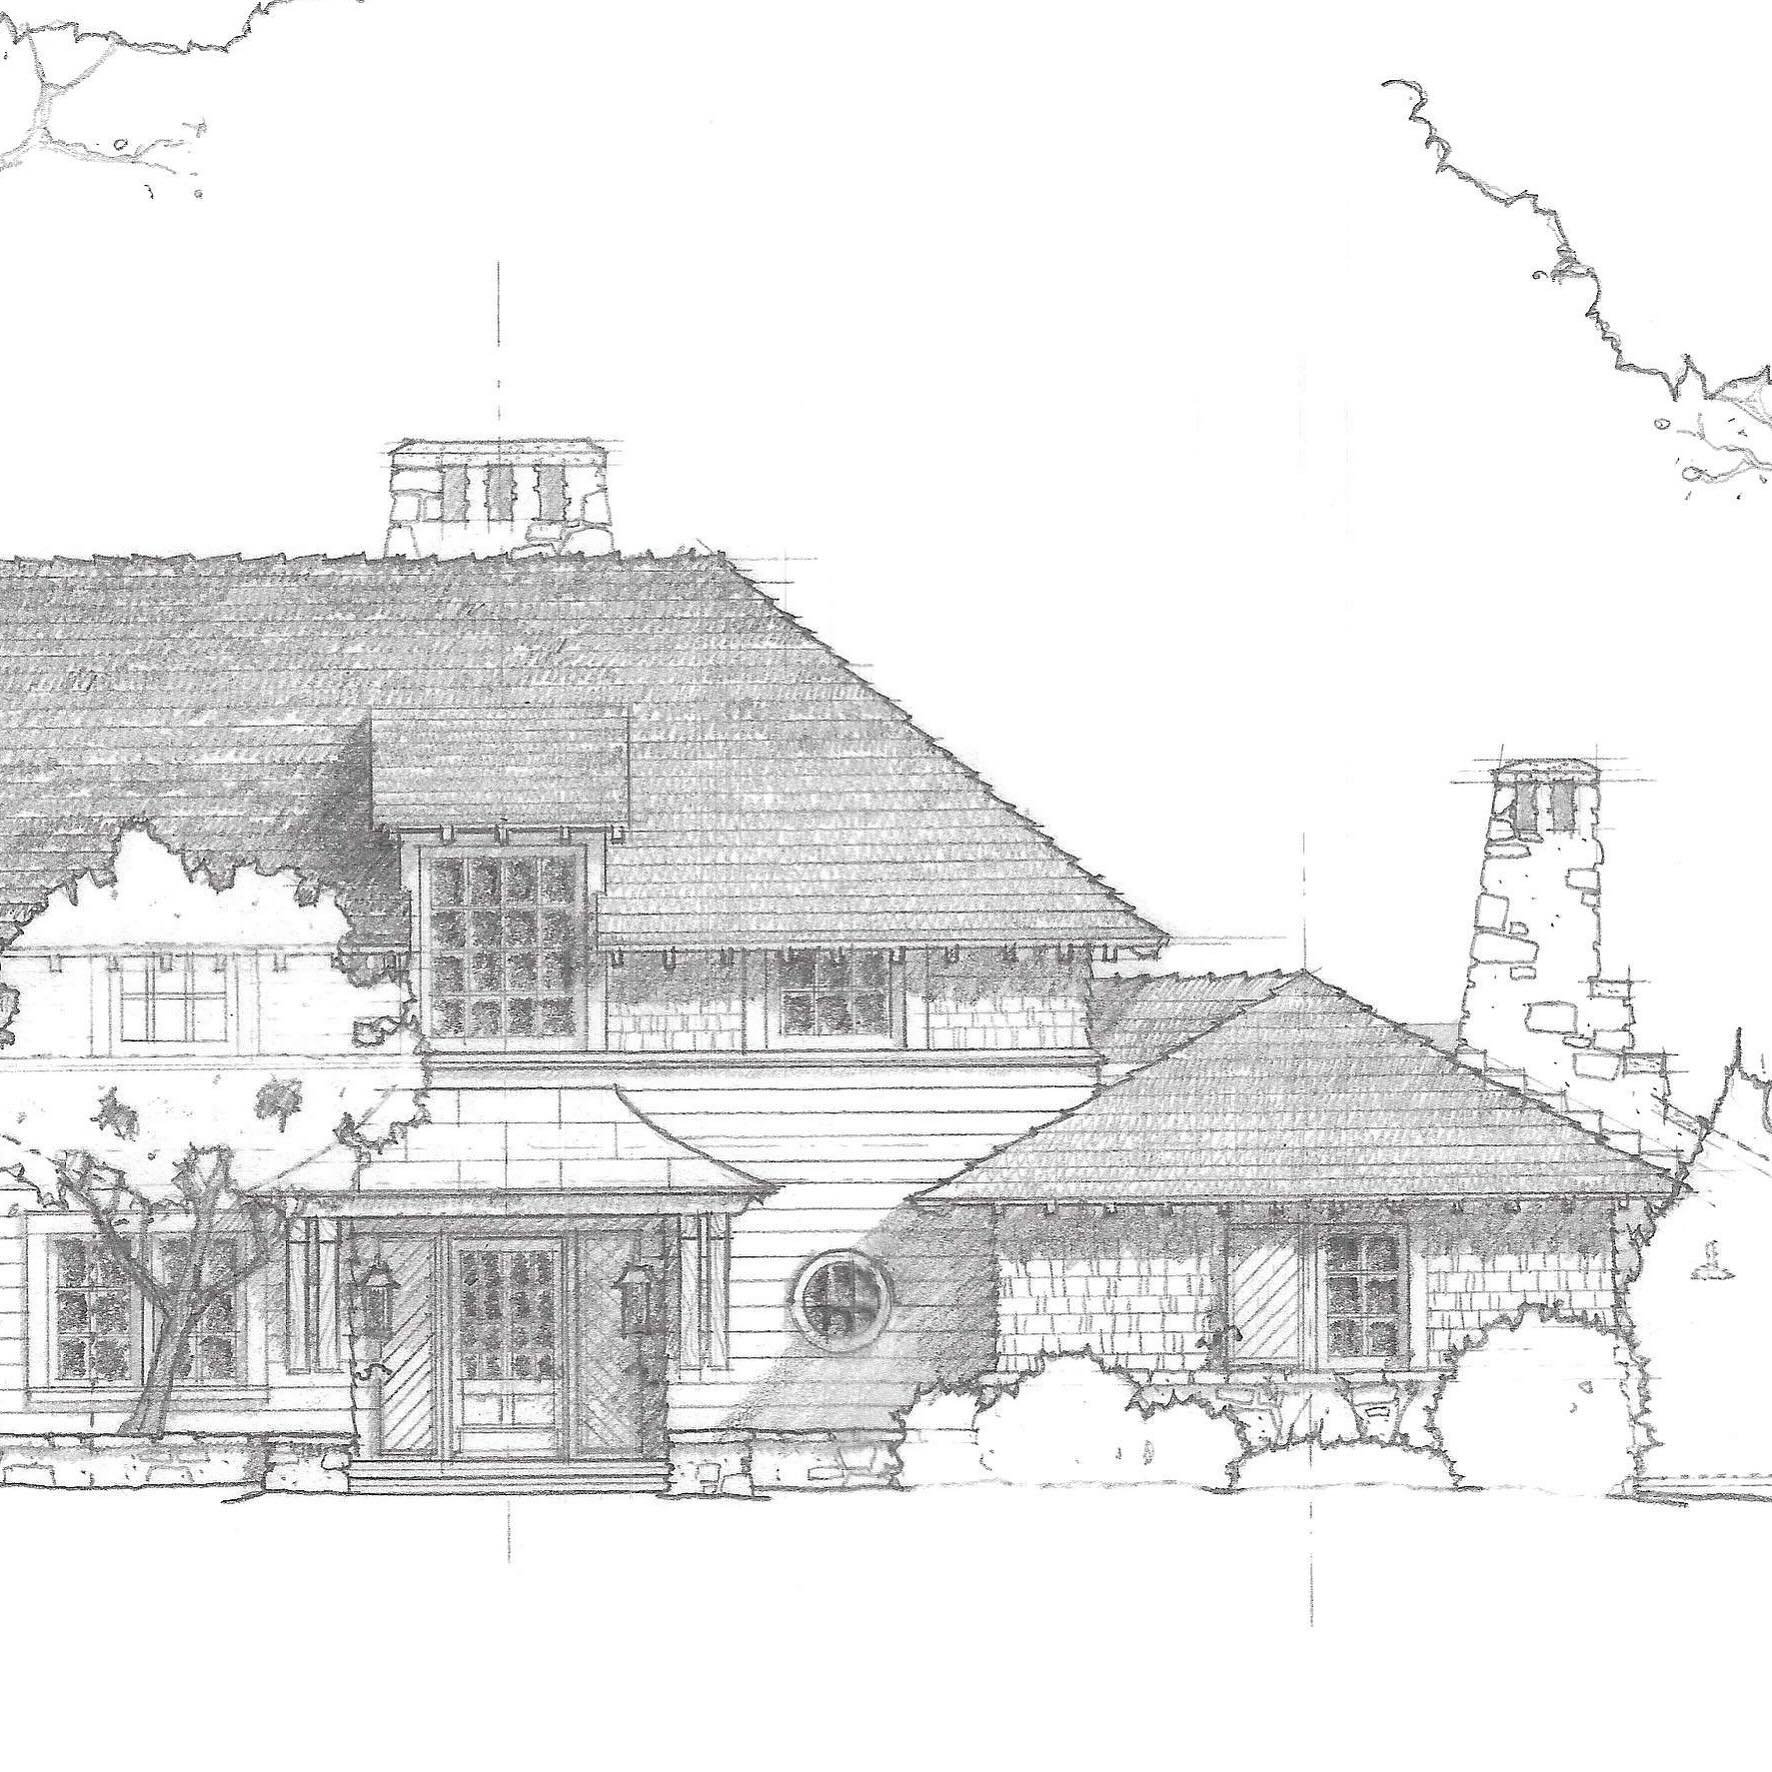 Preliminary entry elevation for a project on Lake Martin
.
.
.
#residentialarchitecture #architecture #pencildrawing #handdrawn #lakehouse #traditionaldesign #traditionalarchitecture #home #family #cedar #stone #entry #design #carlislemoorearchitects